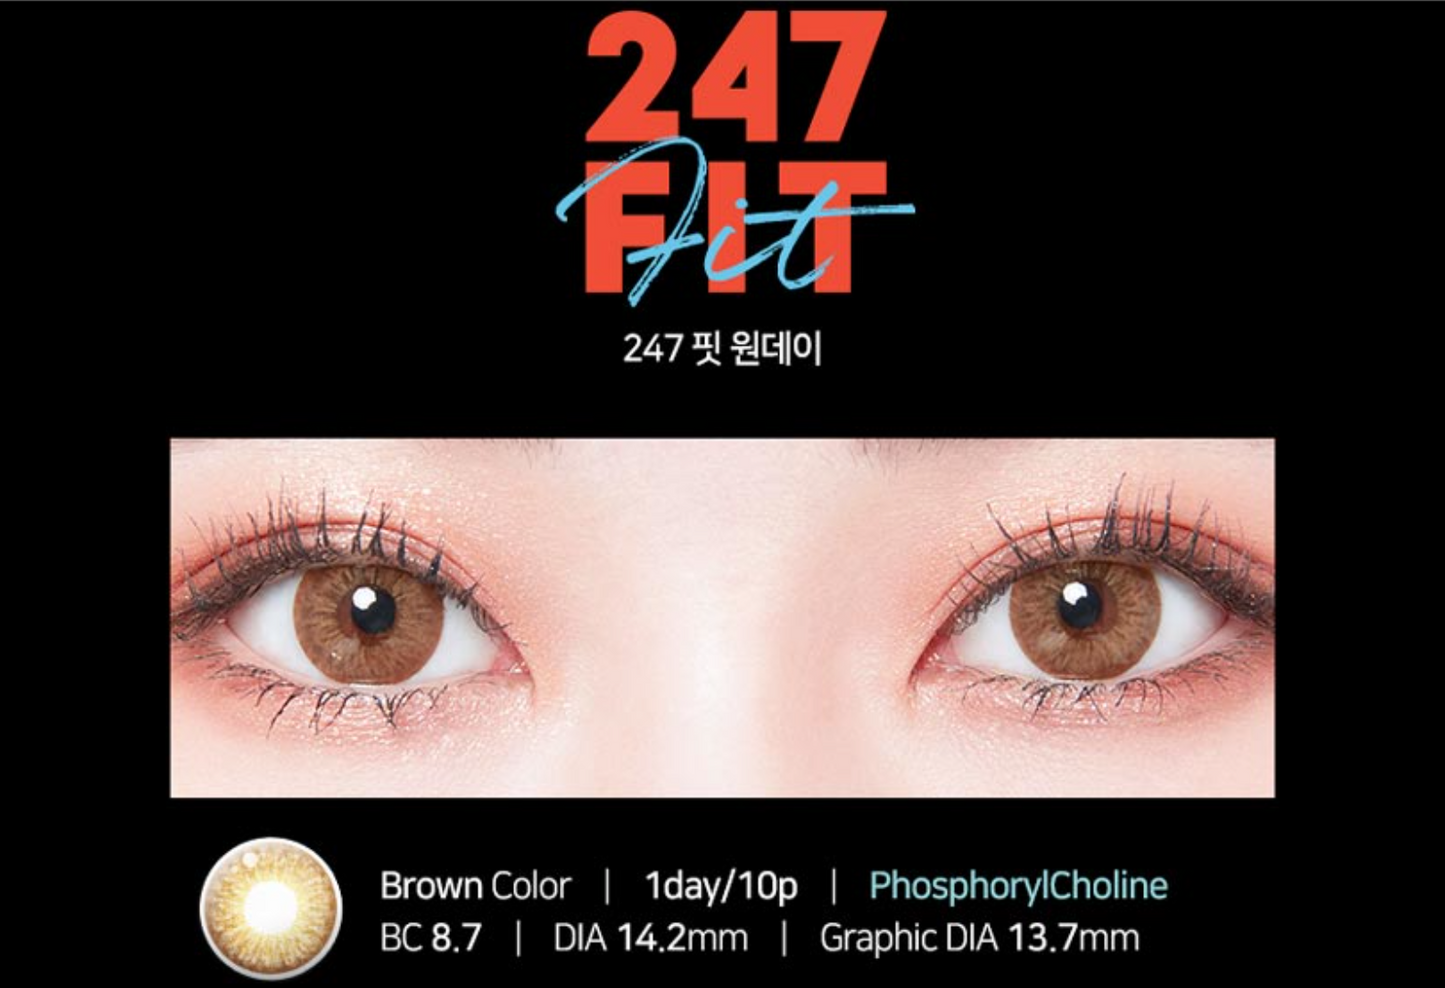 [Order Price] LENSTOWN 247 FIT - BROWN Daily Disposable/10 Tablets 